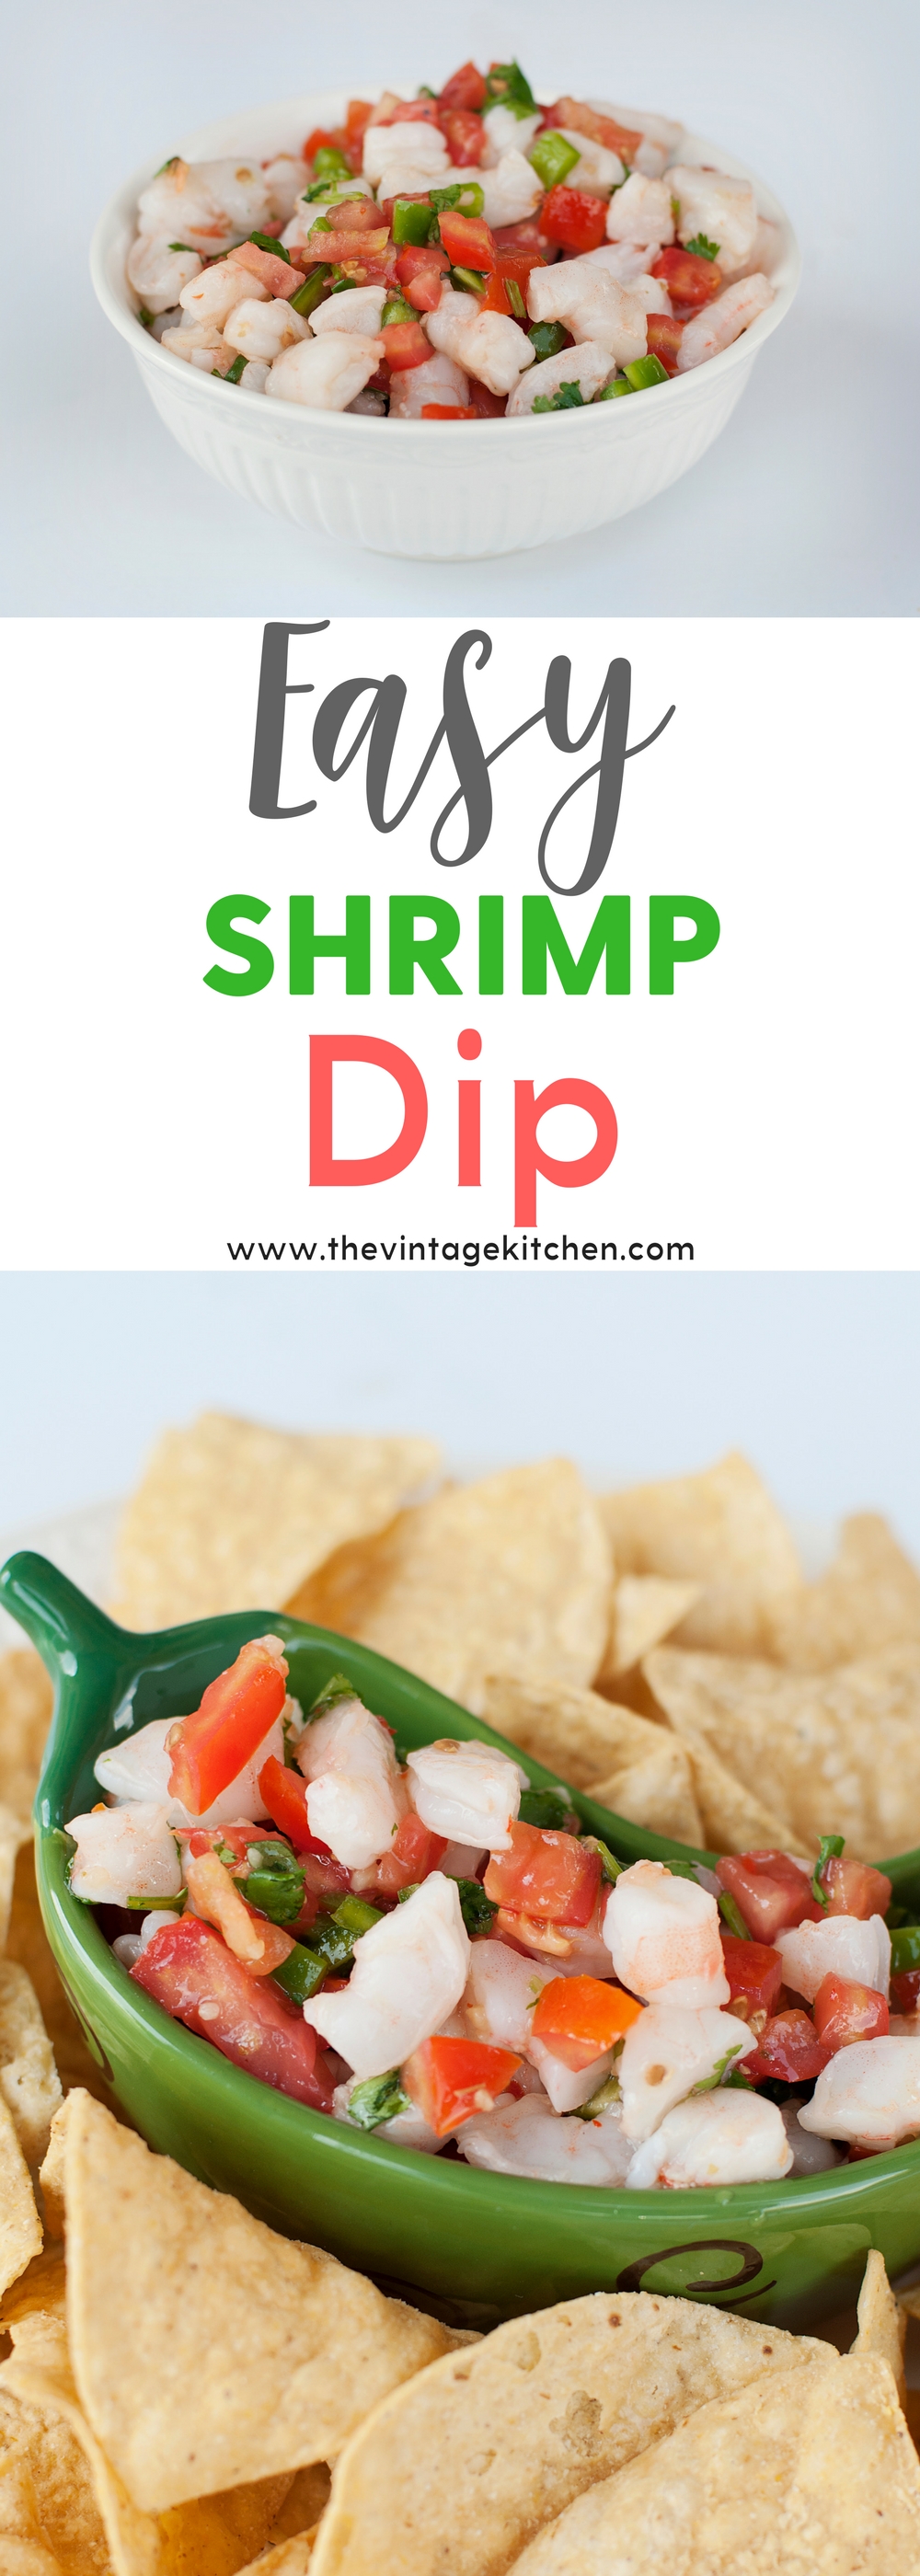 Easy Shrimp Dip is bursting with fresh flavors and textures. Whether it's served with tortilla chips, filling for tacos or on its own it's always a hit!